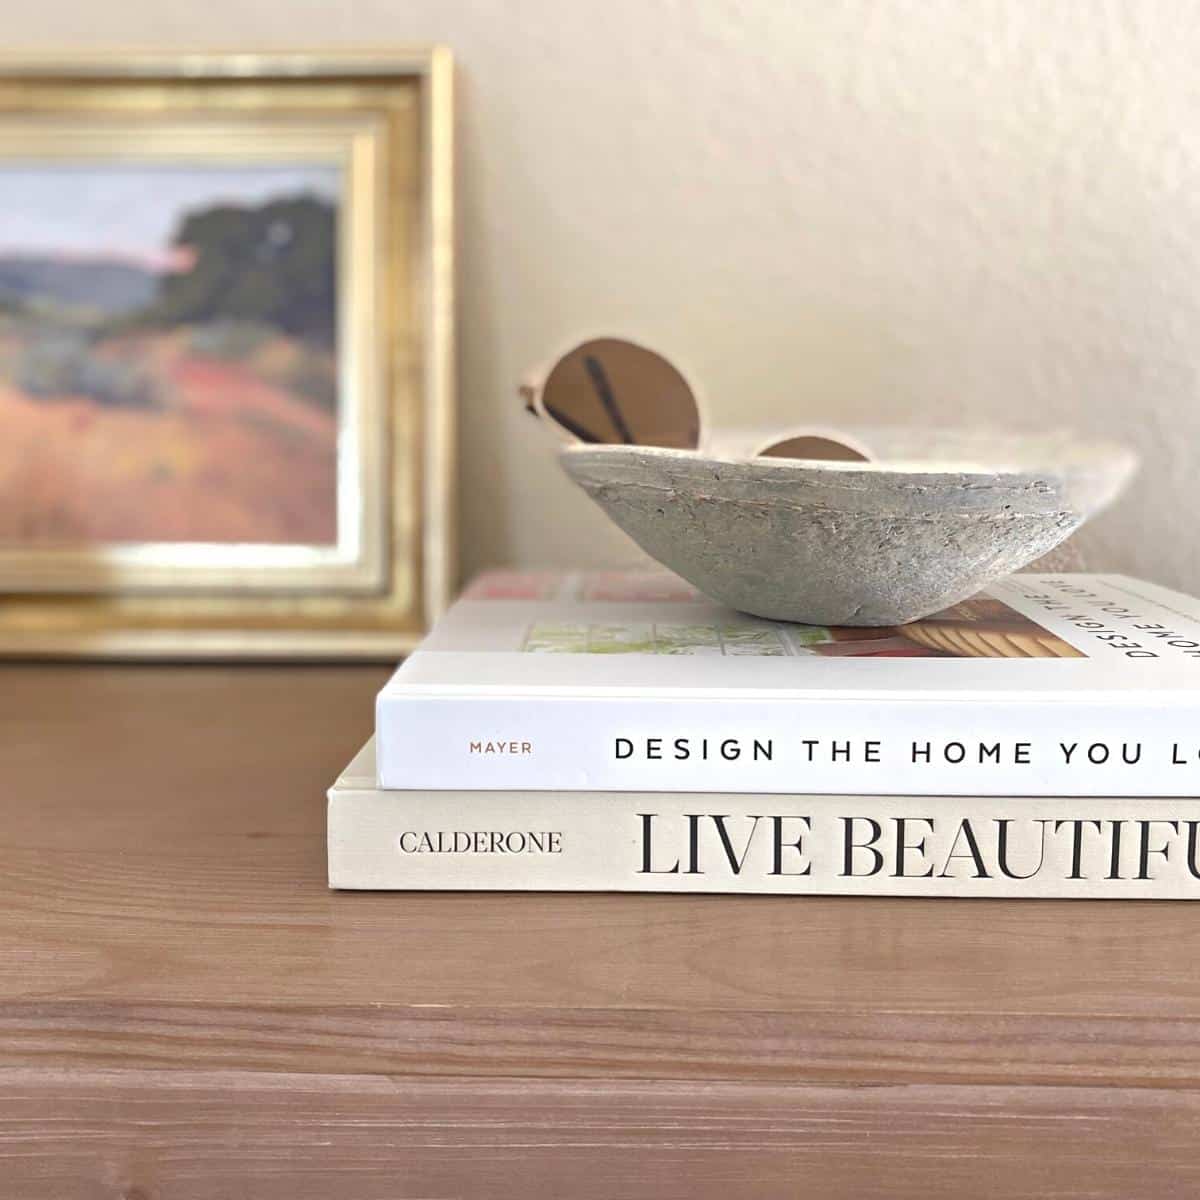 Small gold framed artwork styled next to a stack of two neutral books that has a small grey textured bowl containing sunglasses on top.